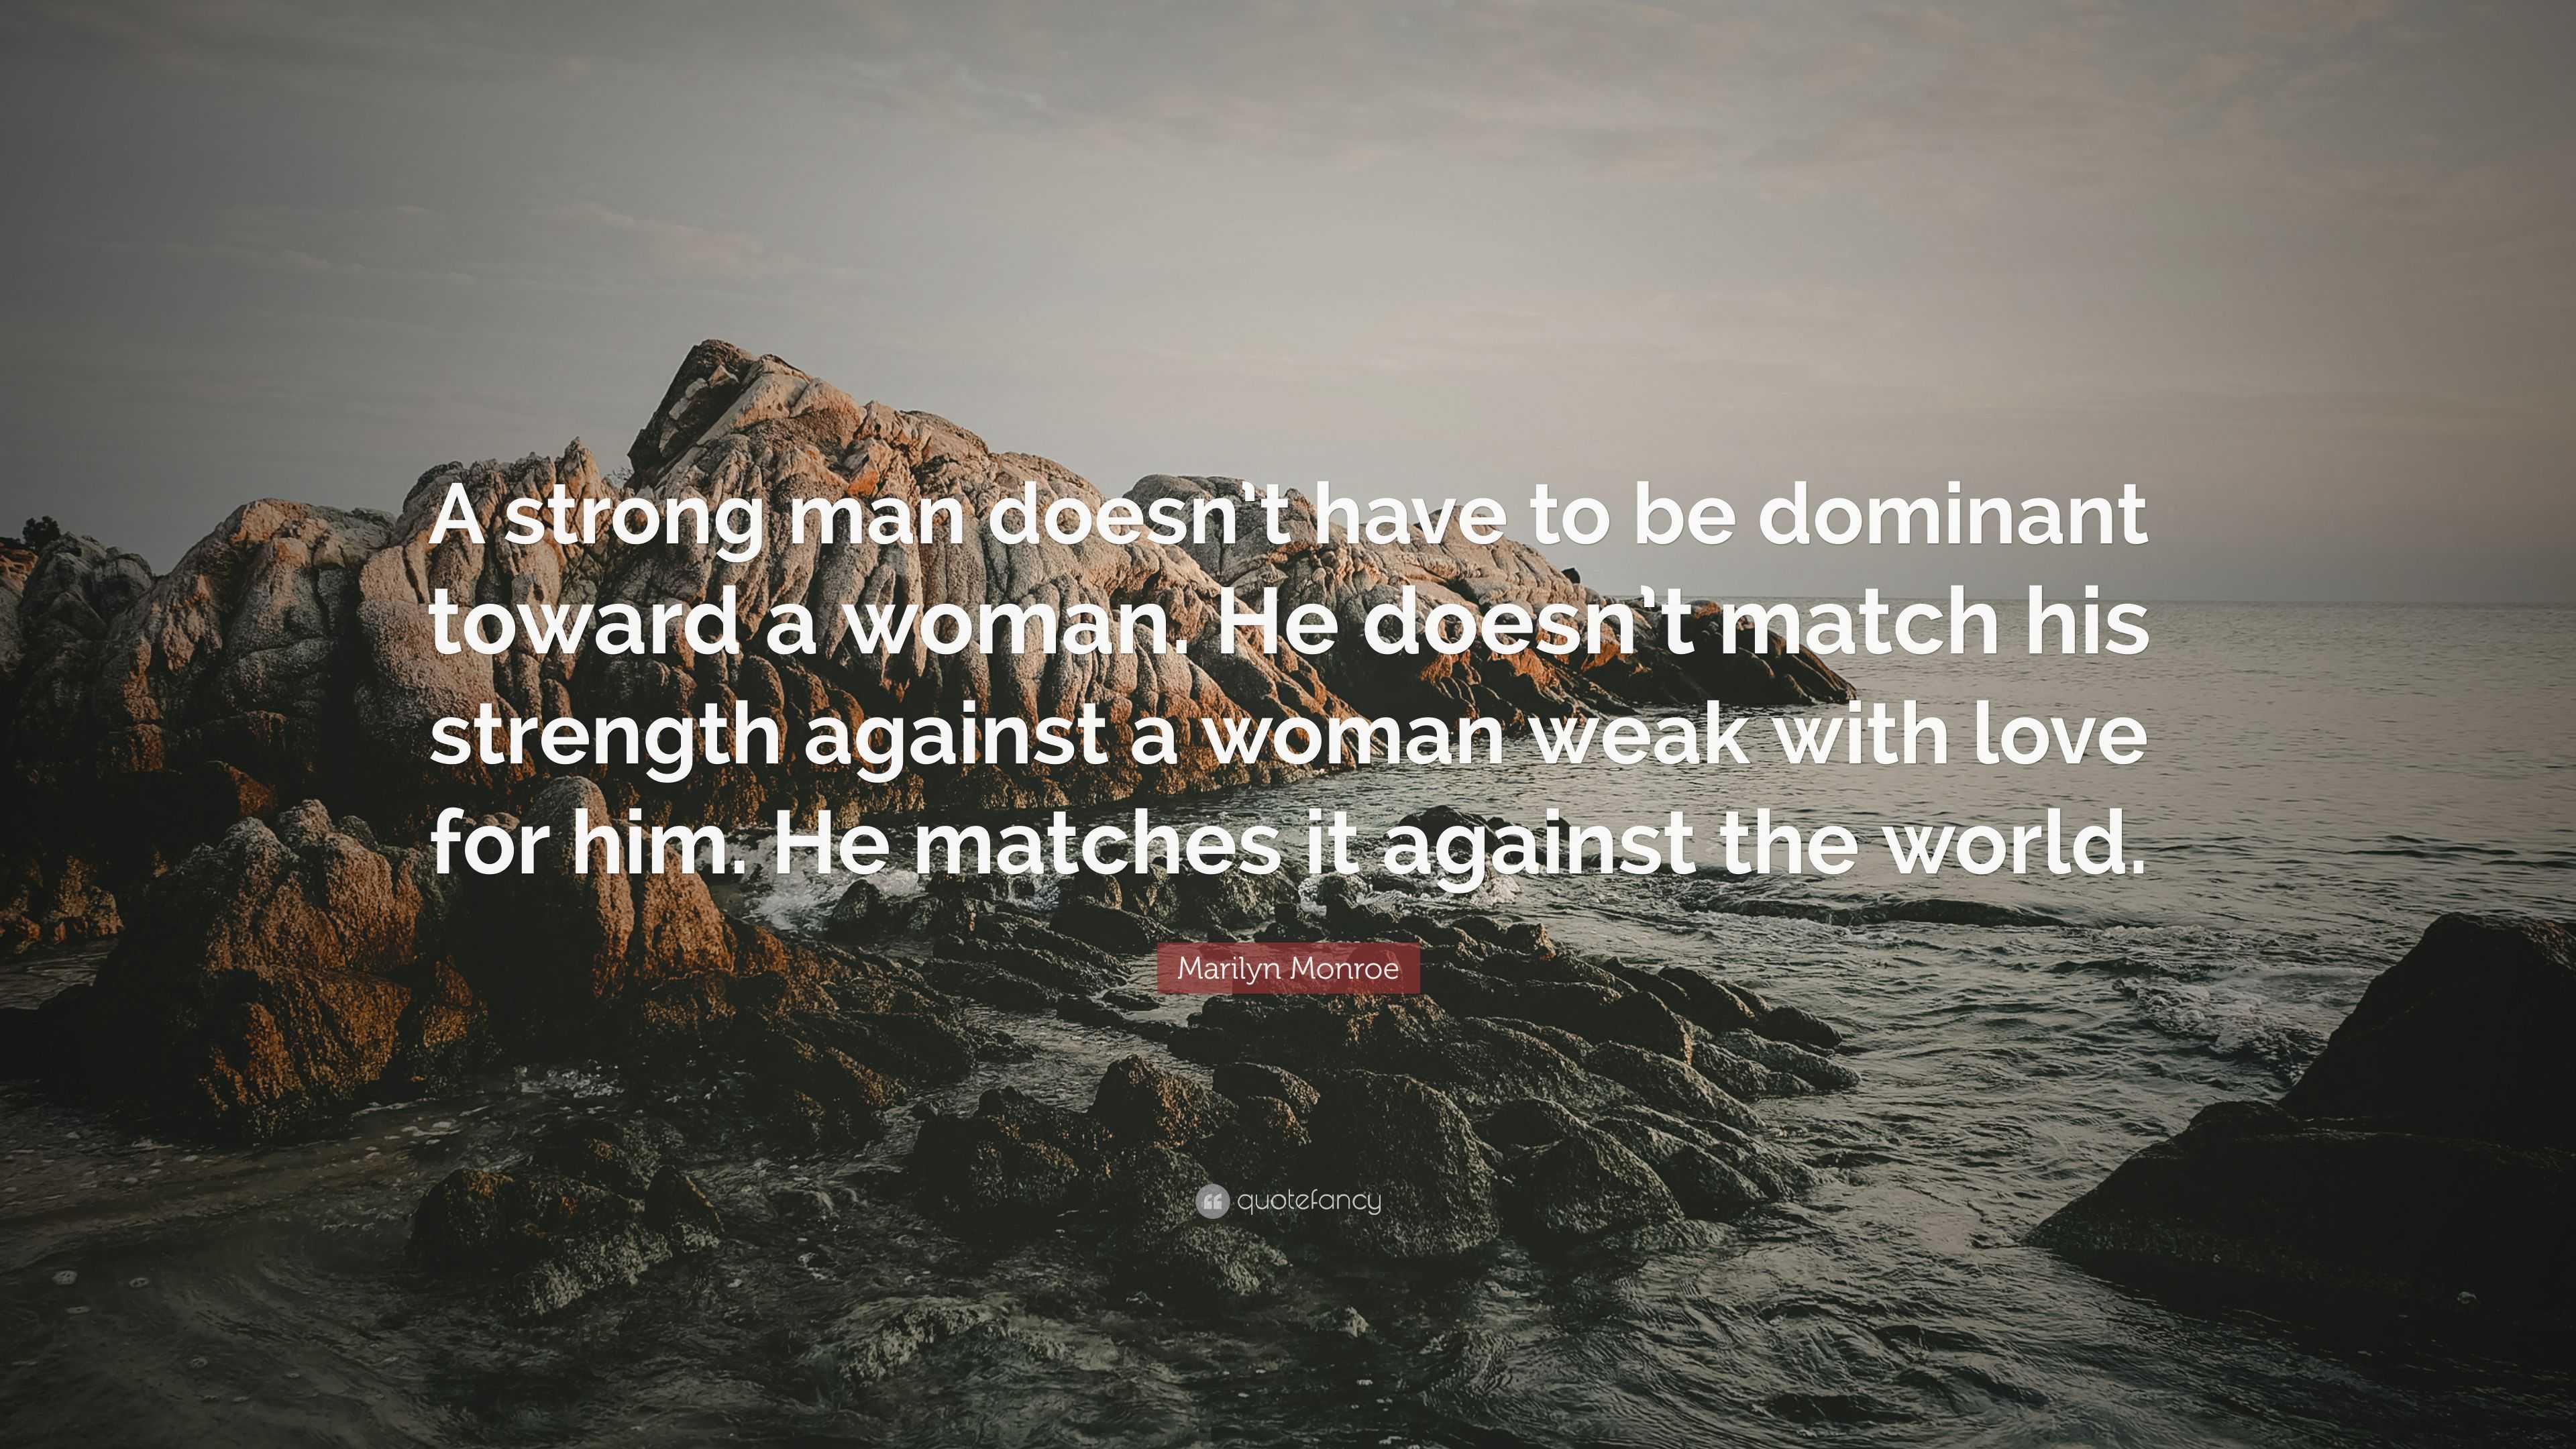 Marilyn Monroe Quote: “A strong man doesn’t have to be dominant toward ...